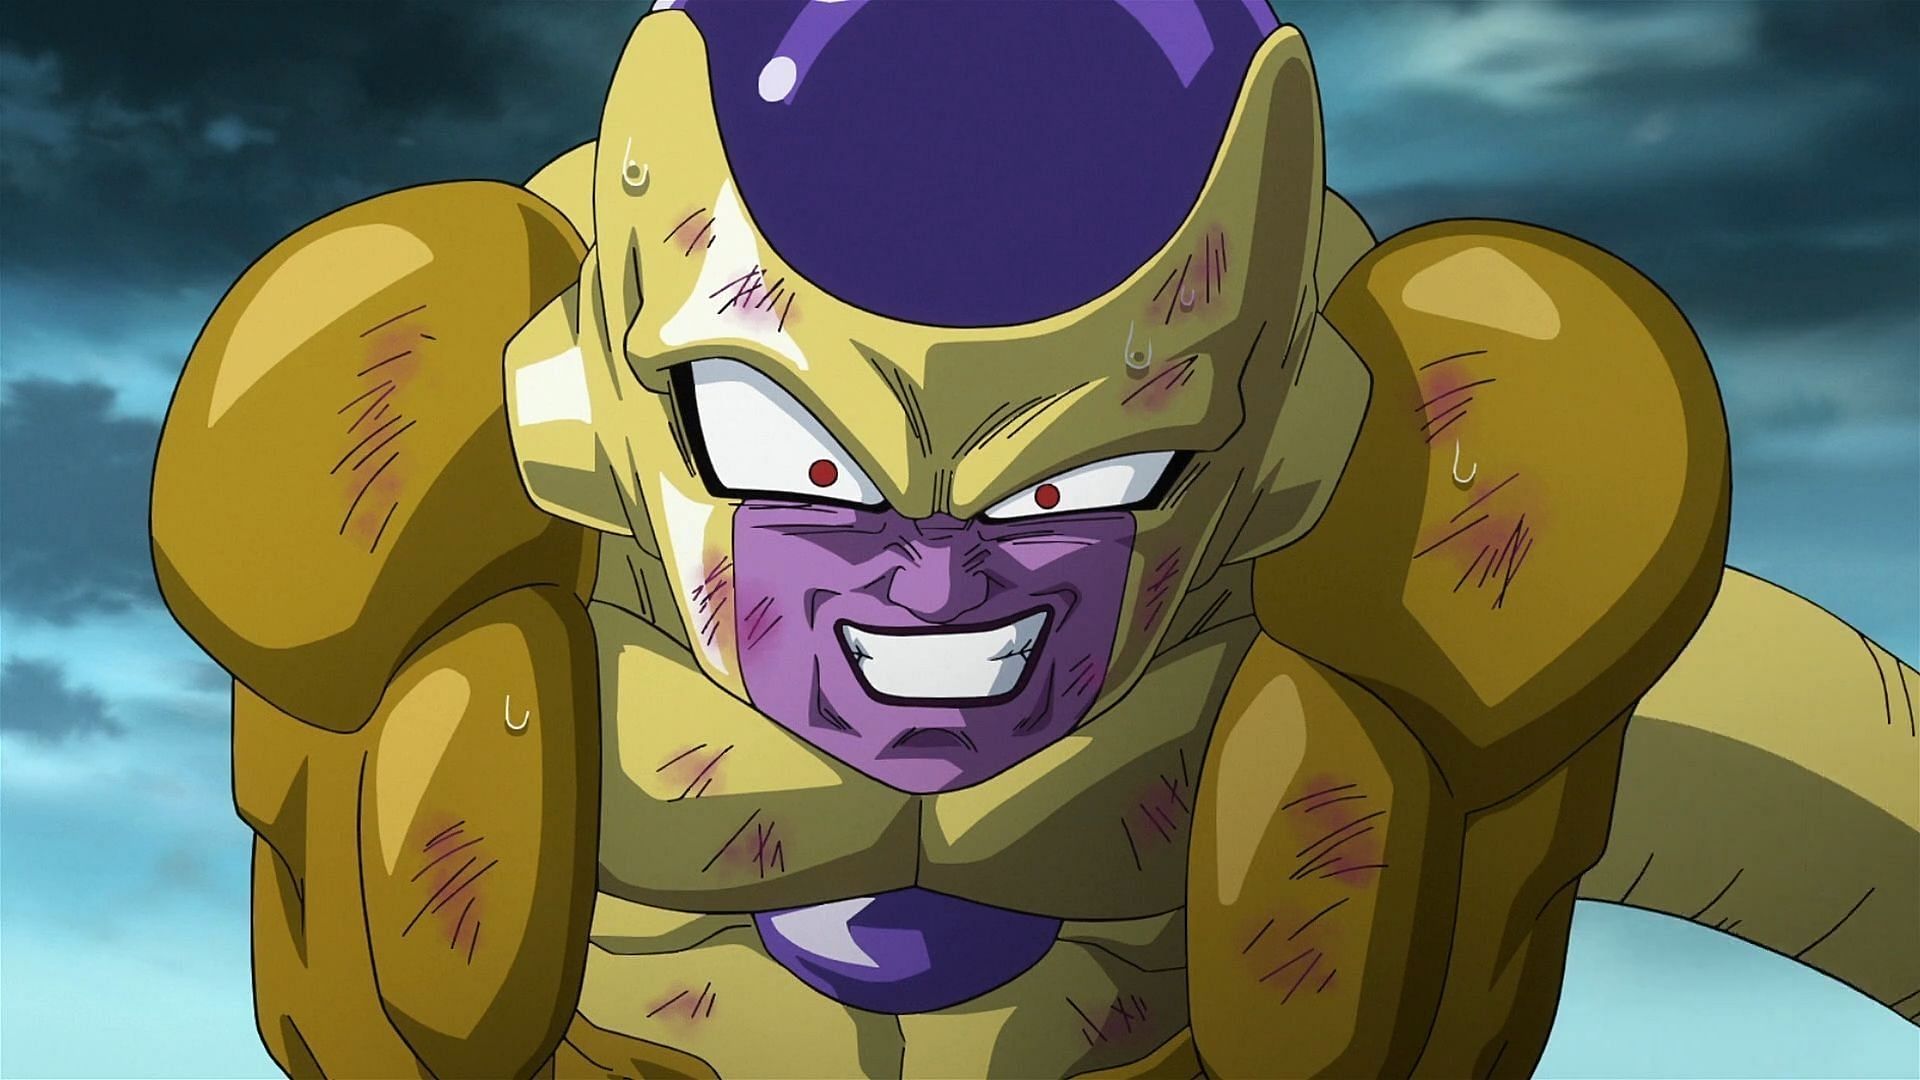 Frieza is the Lucifer of Dragon Ball &amp; his fallen angels have been around all along